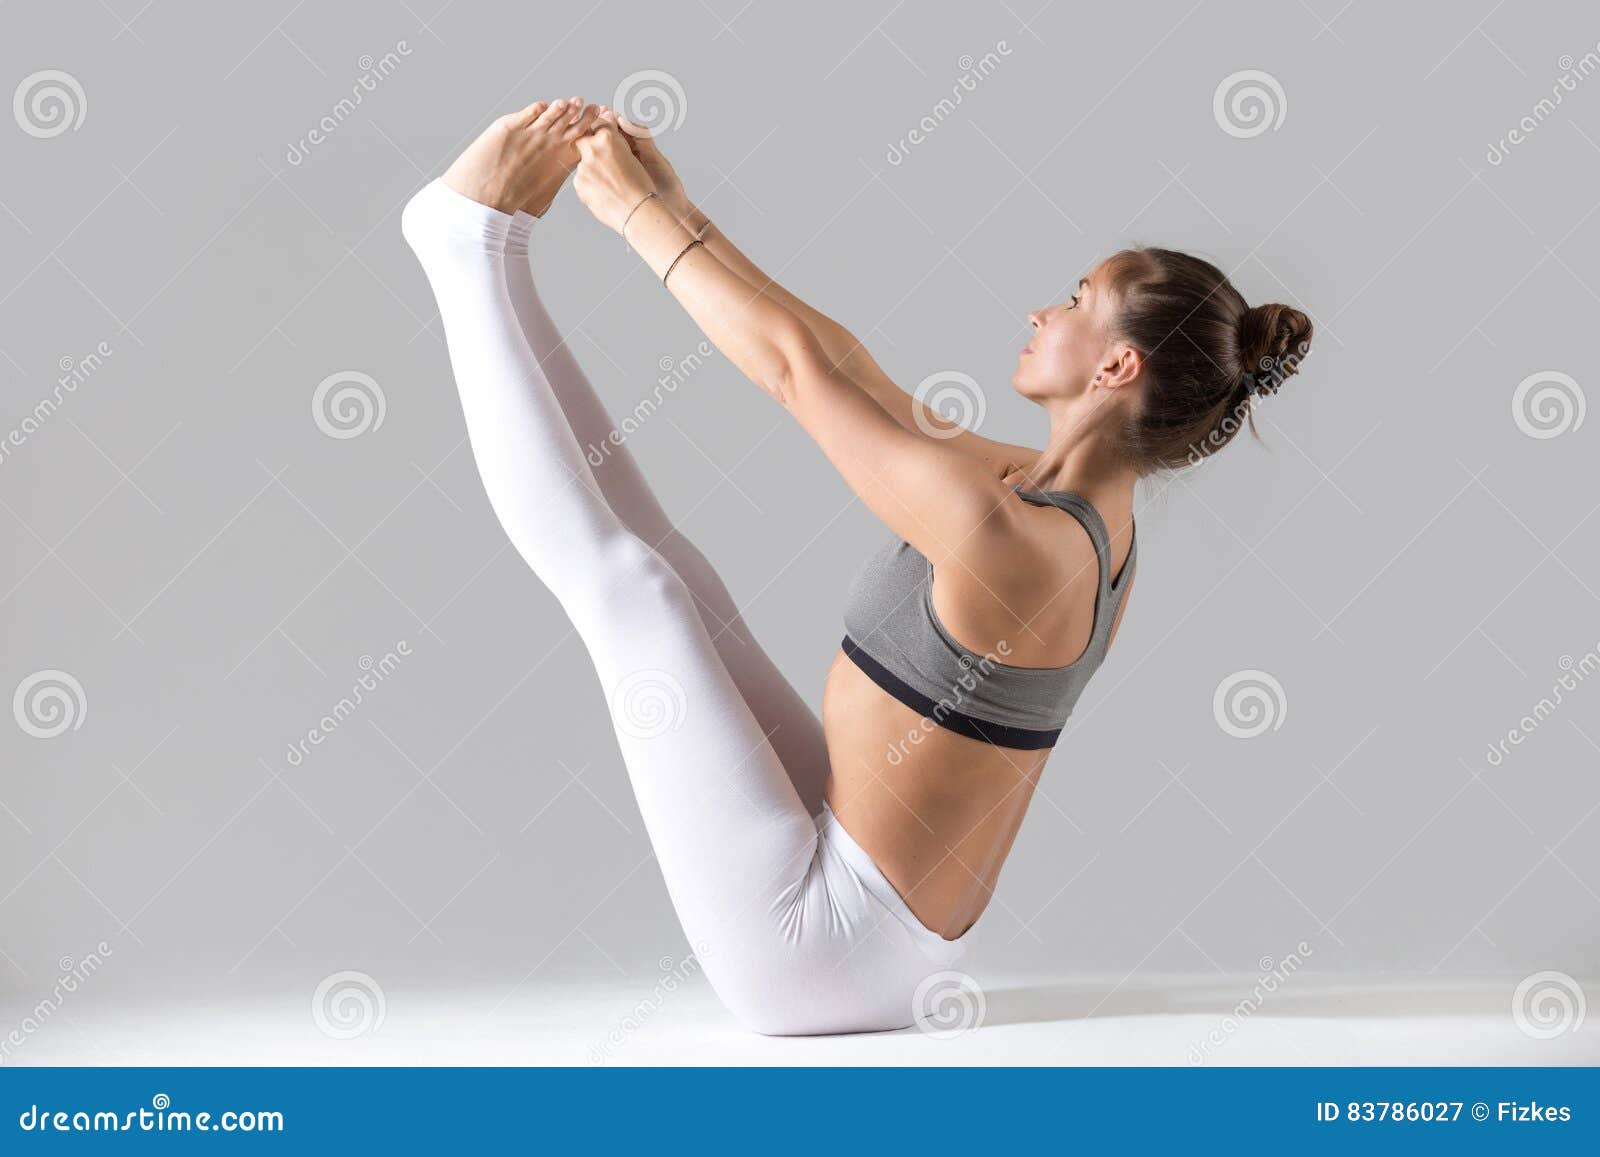 Woman doing boat yoga pose on the beach stock photo (238147